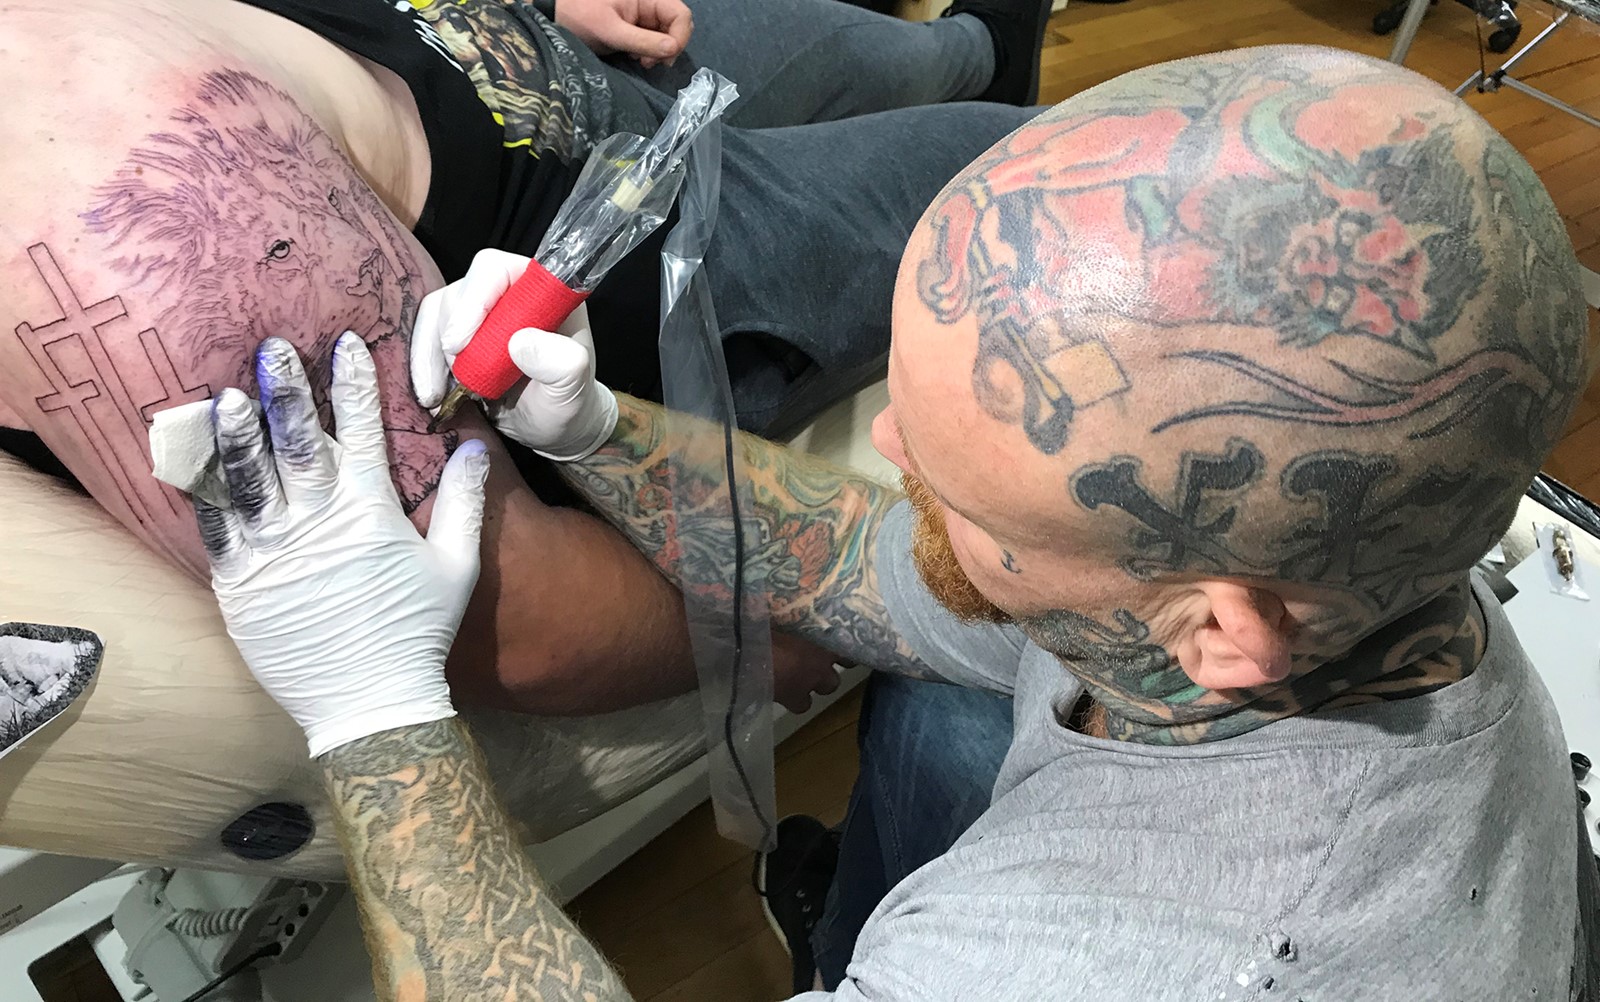 Beauty therapy, tattooing and skin piercing